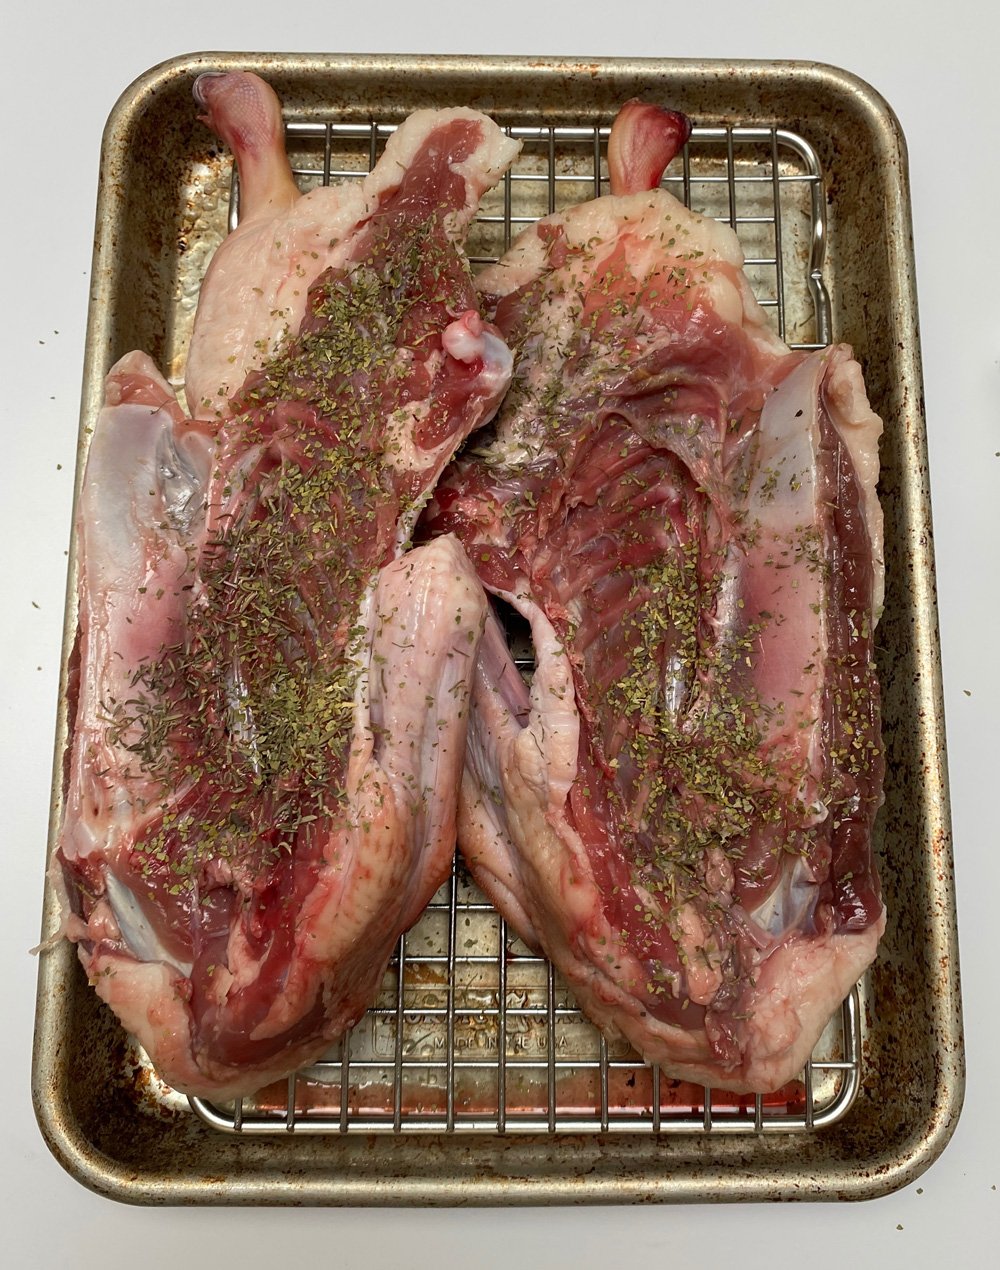 Sous Vide vs. Slow Cooker: Which is Better? - A Duck's Oven